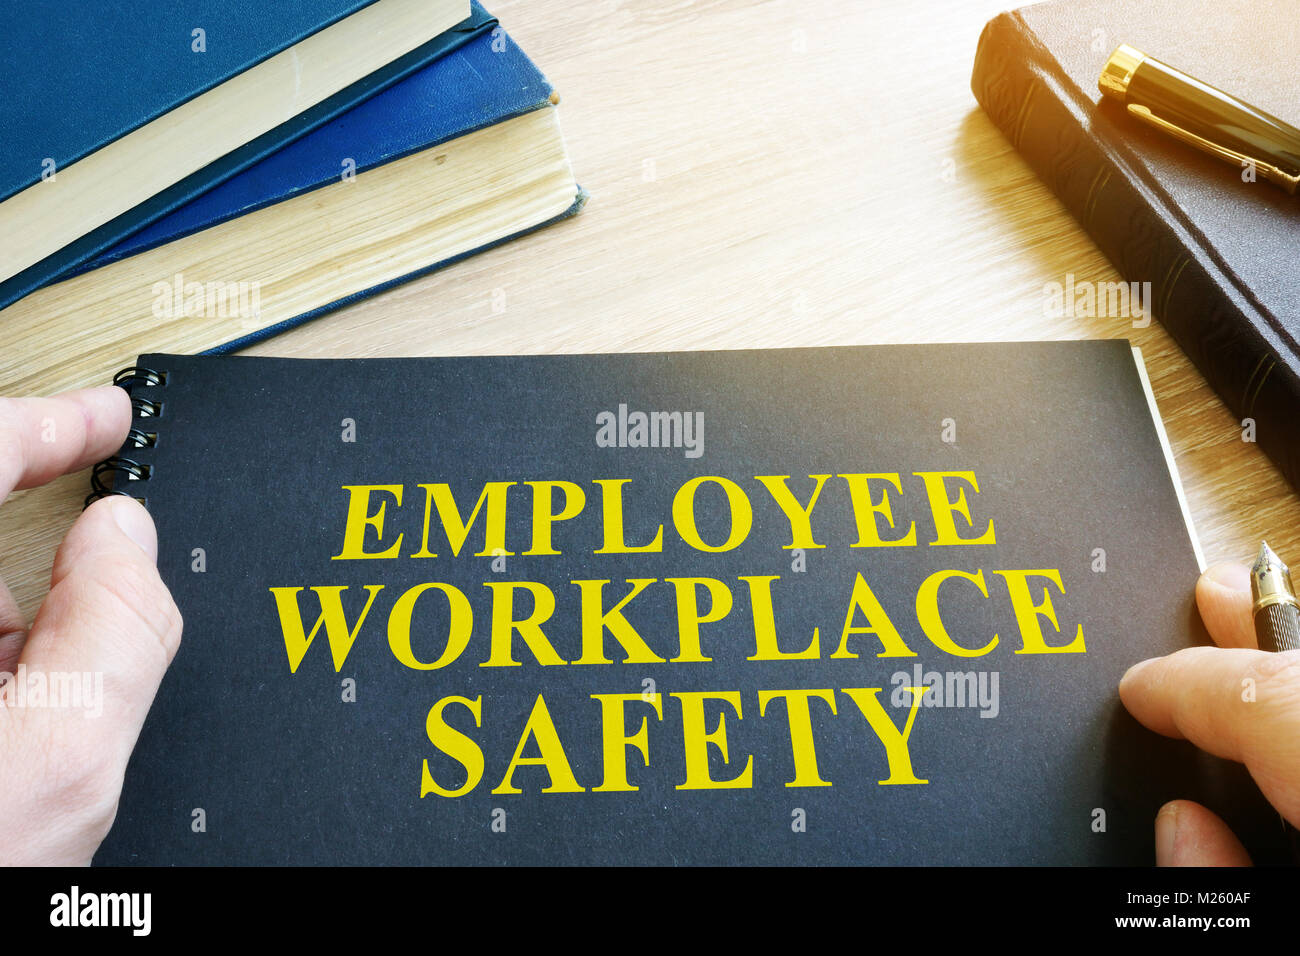 Employee Workplace Safety guide on a table. Stock Photo